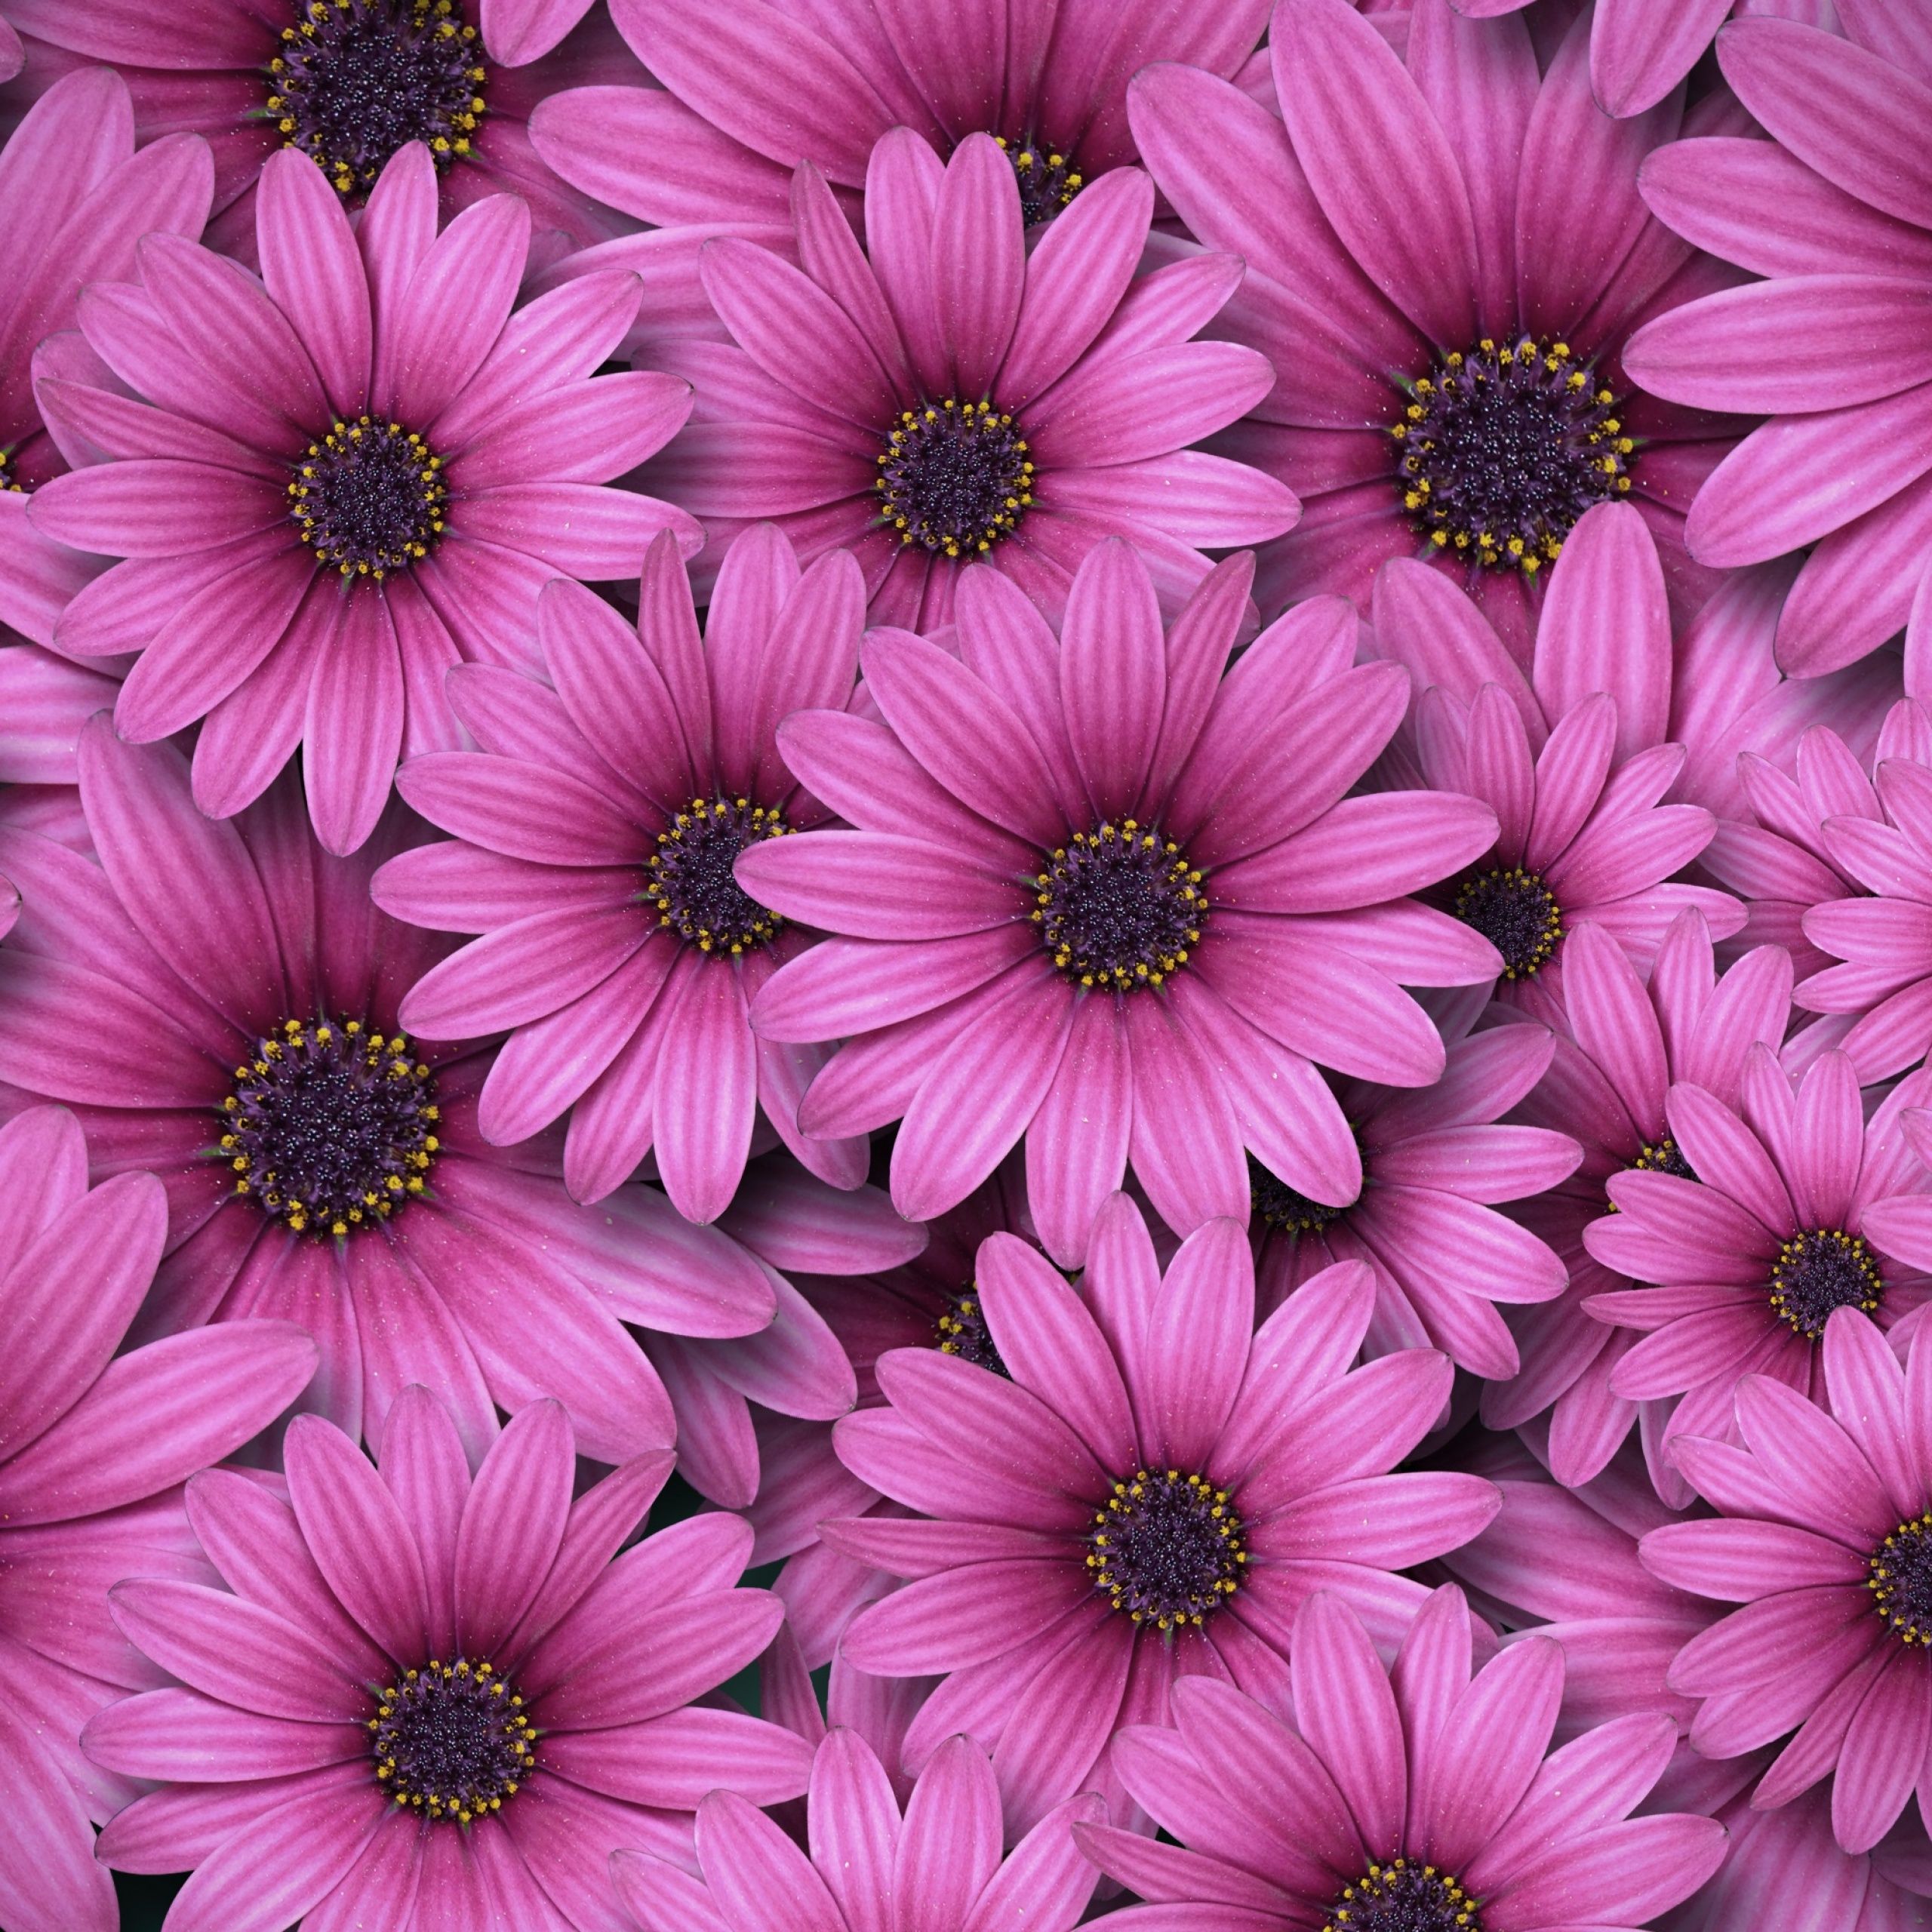 A large group of purple flowers - Daisy